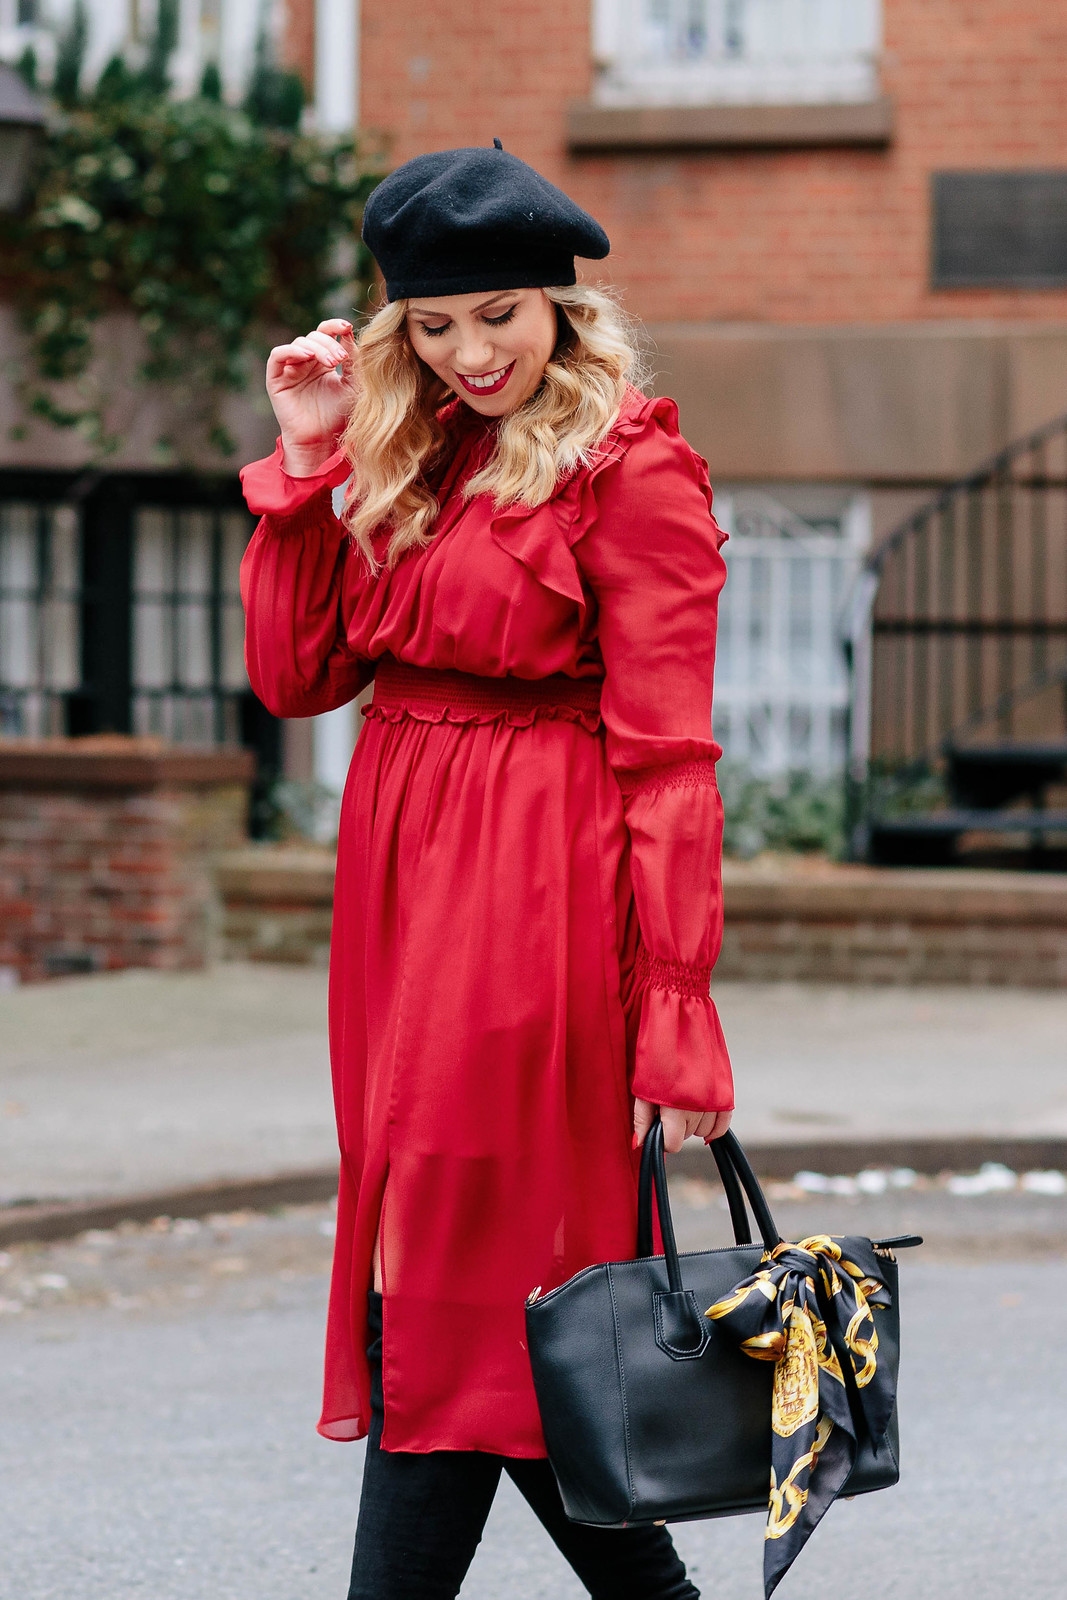 Red Ruffle Dress Black Beret French Style Outfit